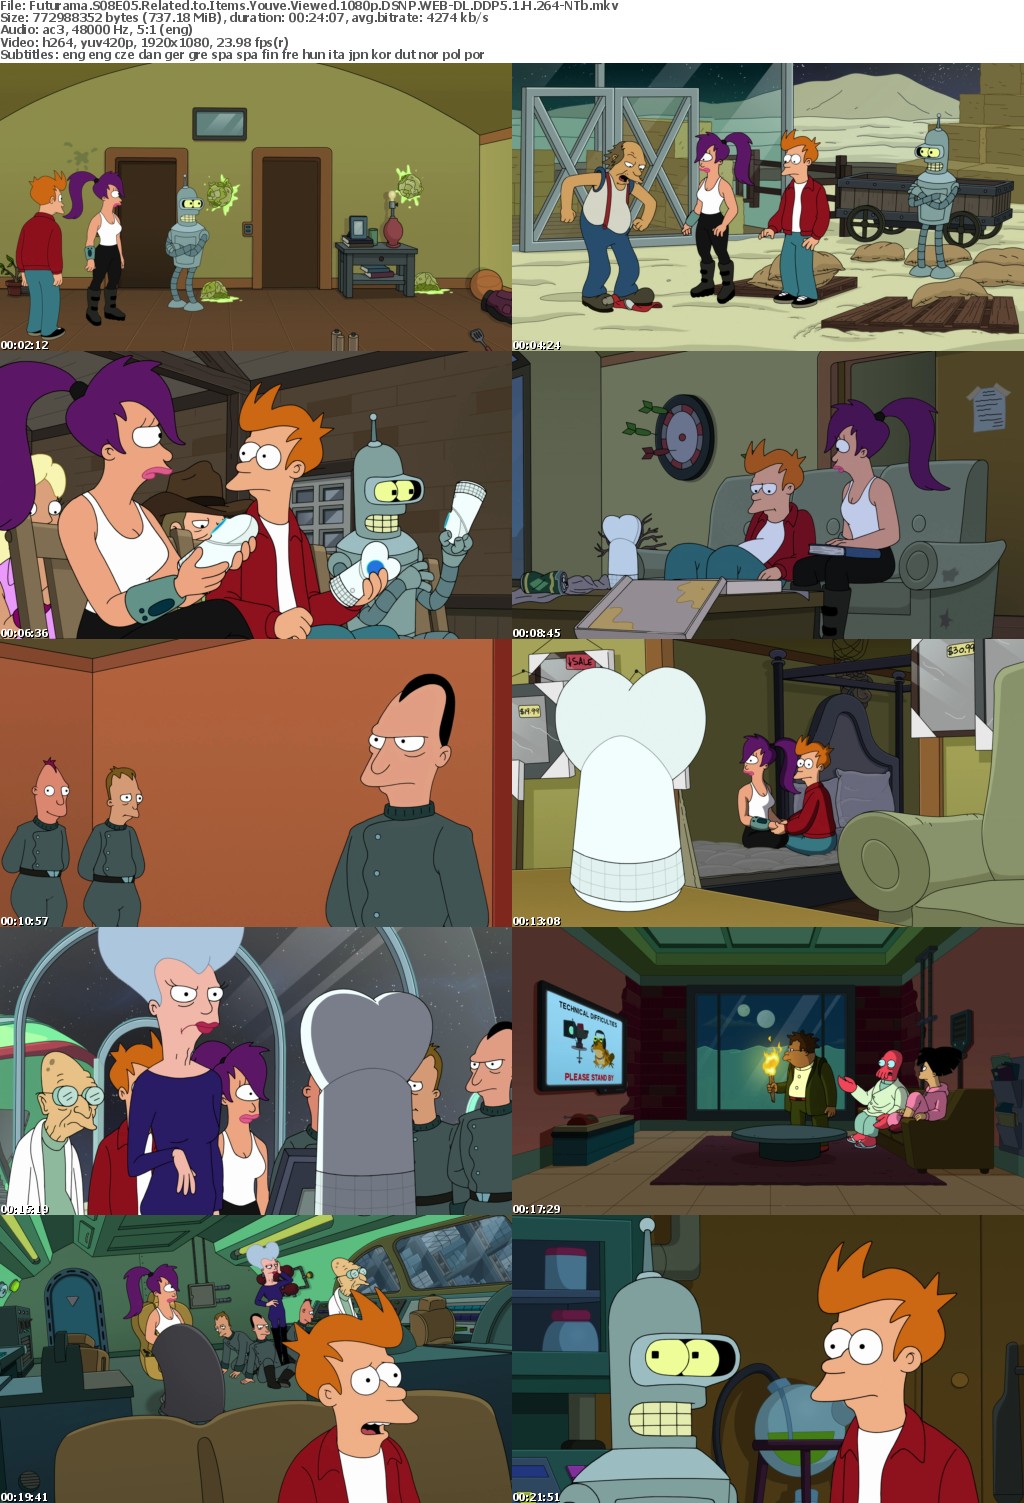 Futurama S08E05 Related to Items Youve Viewed 1080p DSNP WEB-DL DDP5 1 H 264-NTb